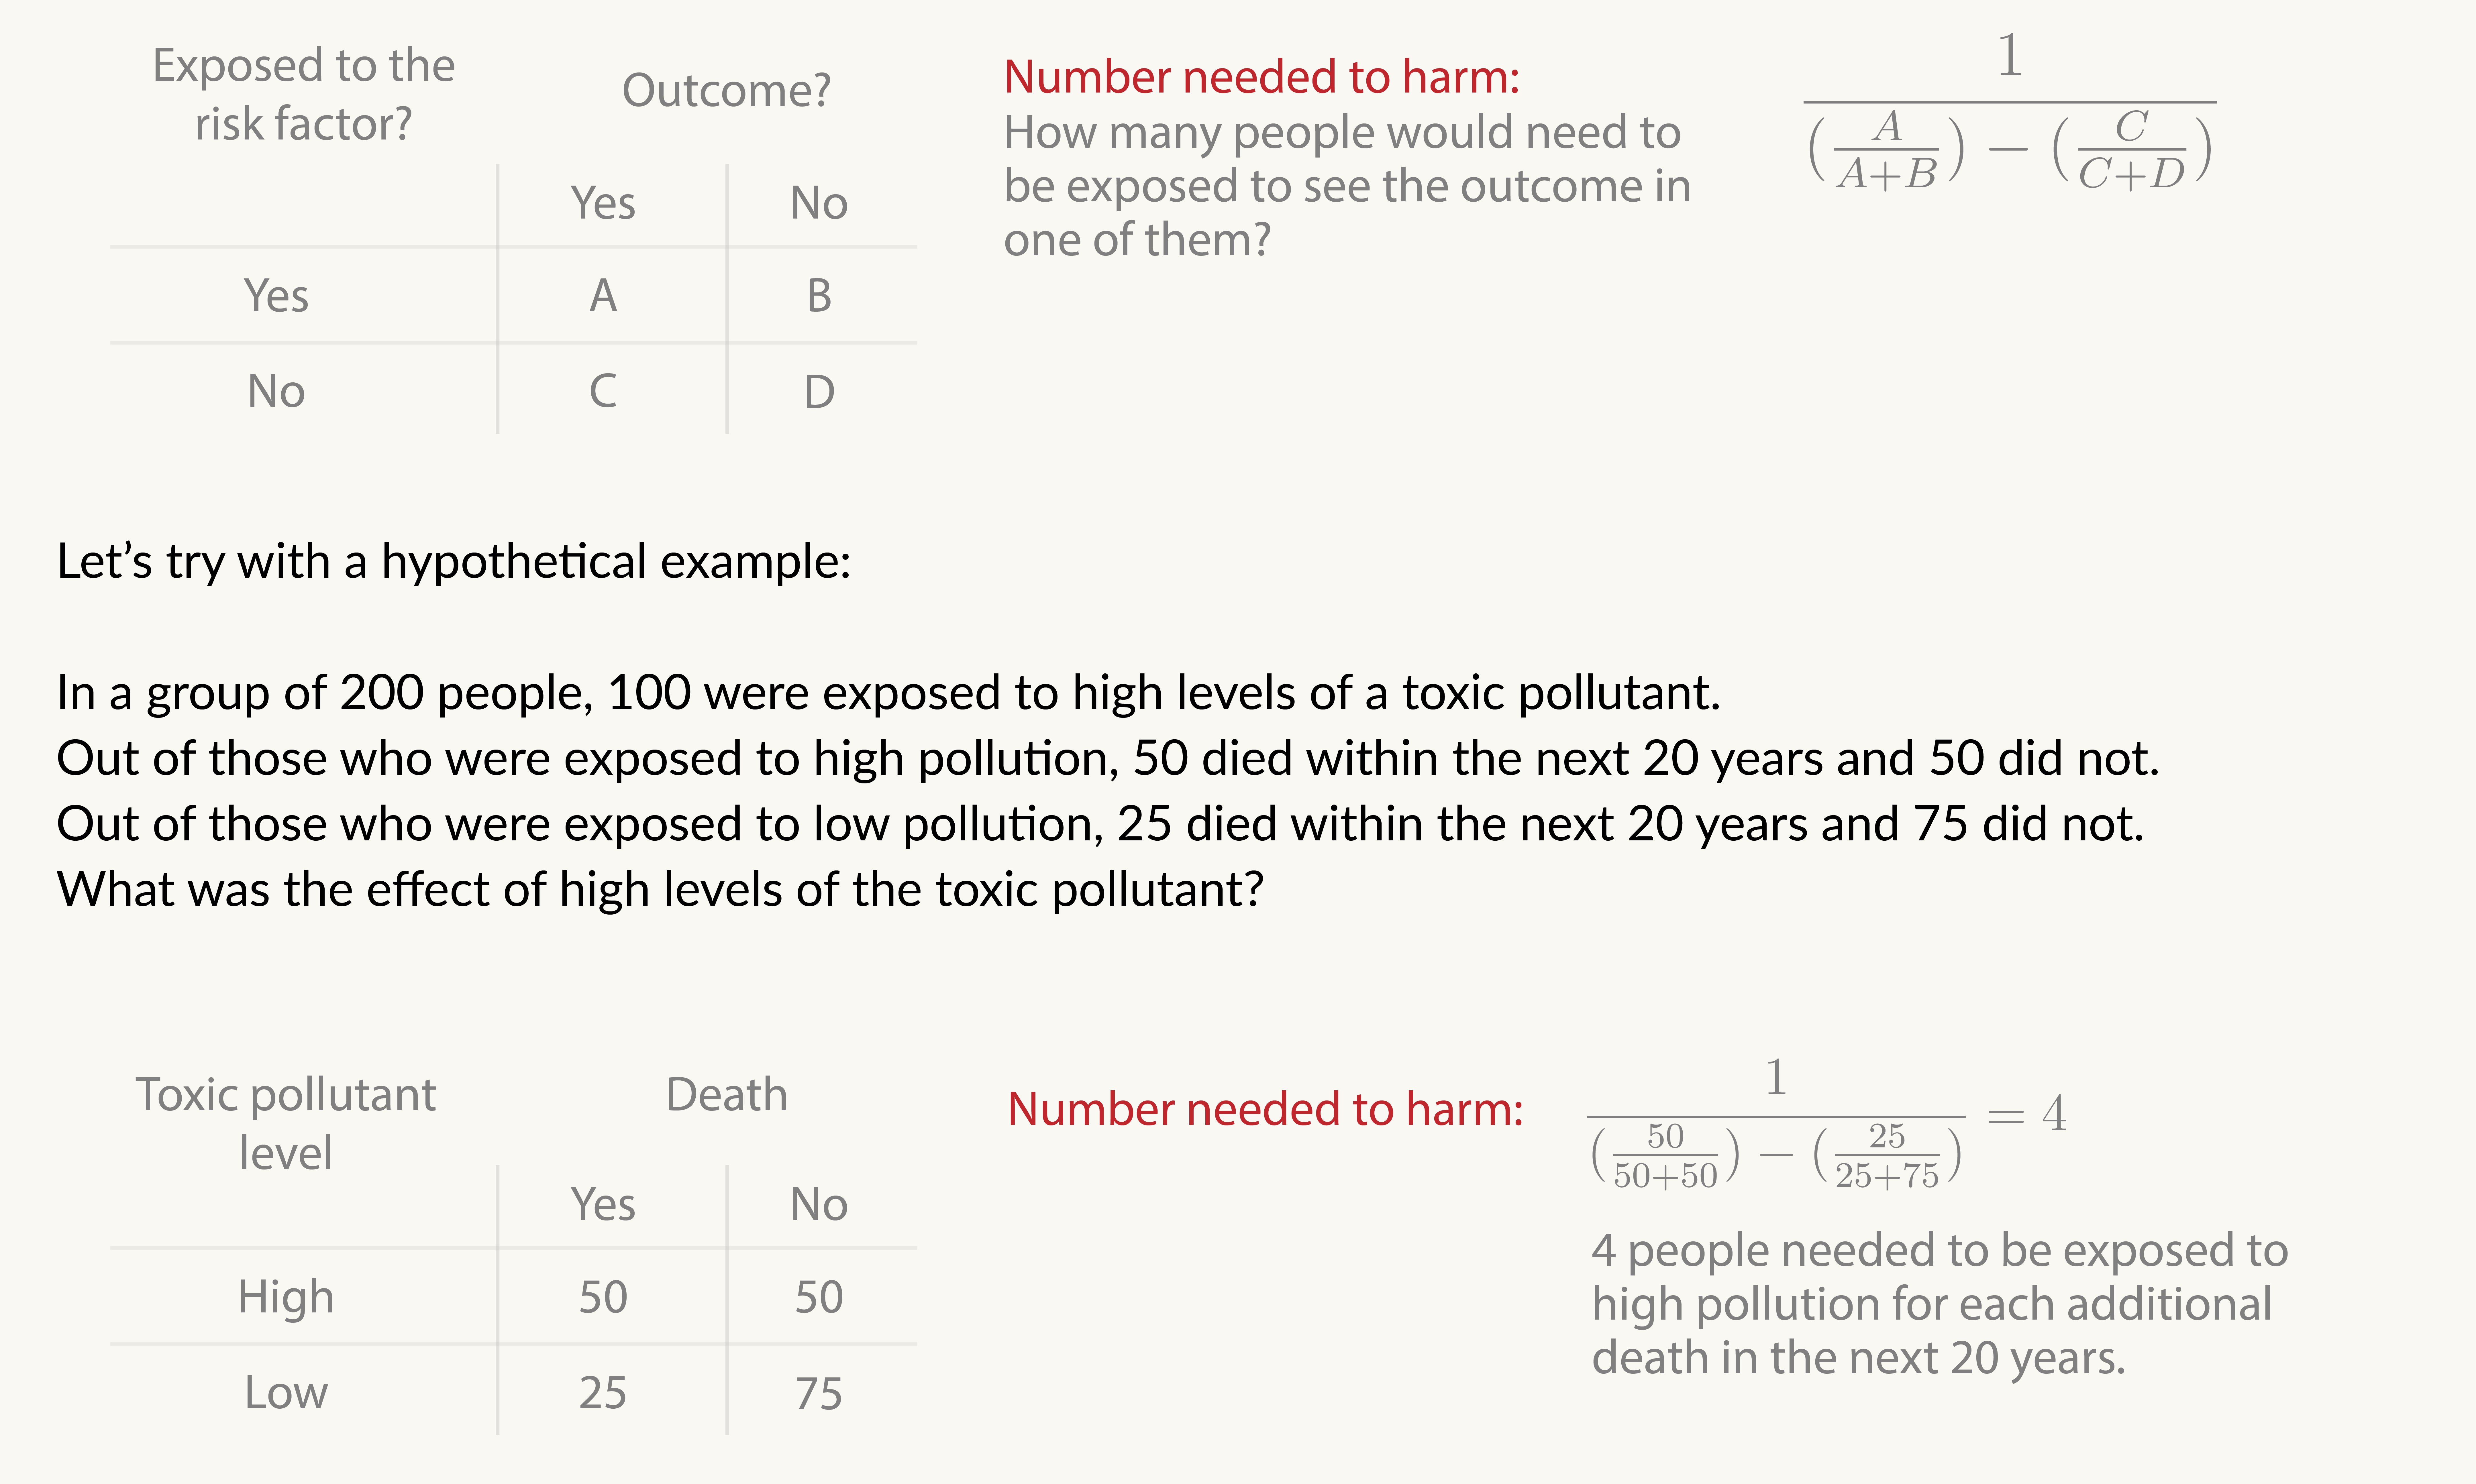 How to calculate the number needed to harm, hypothetical example